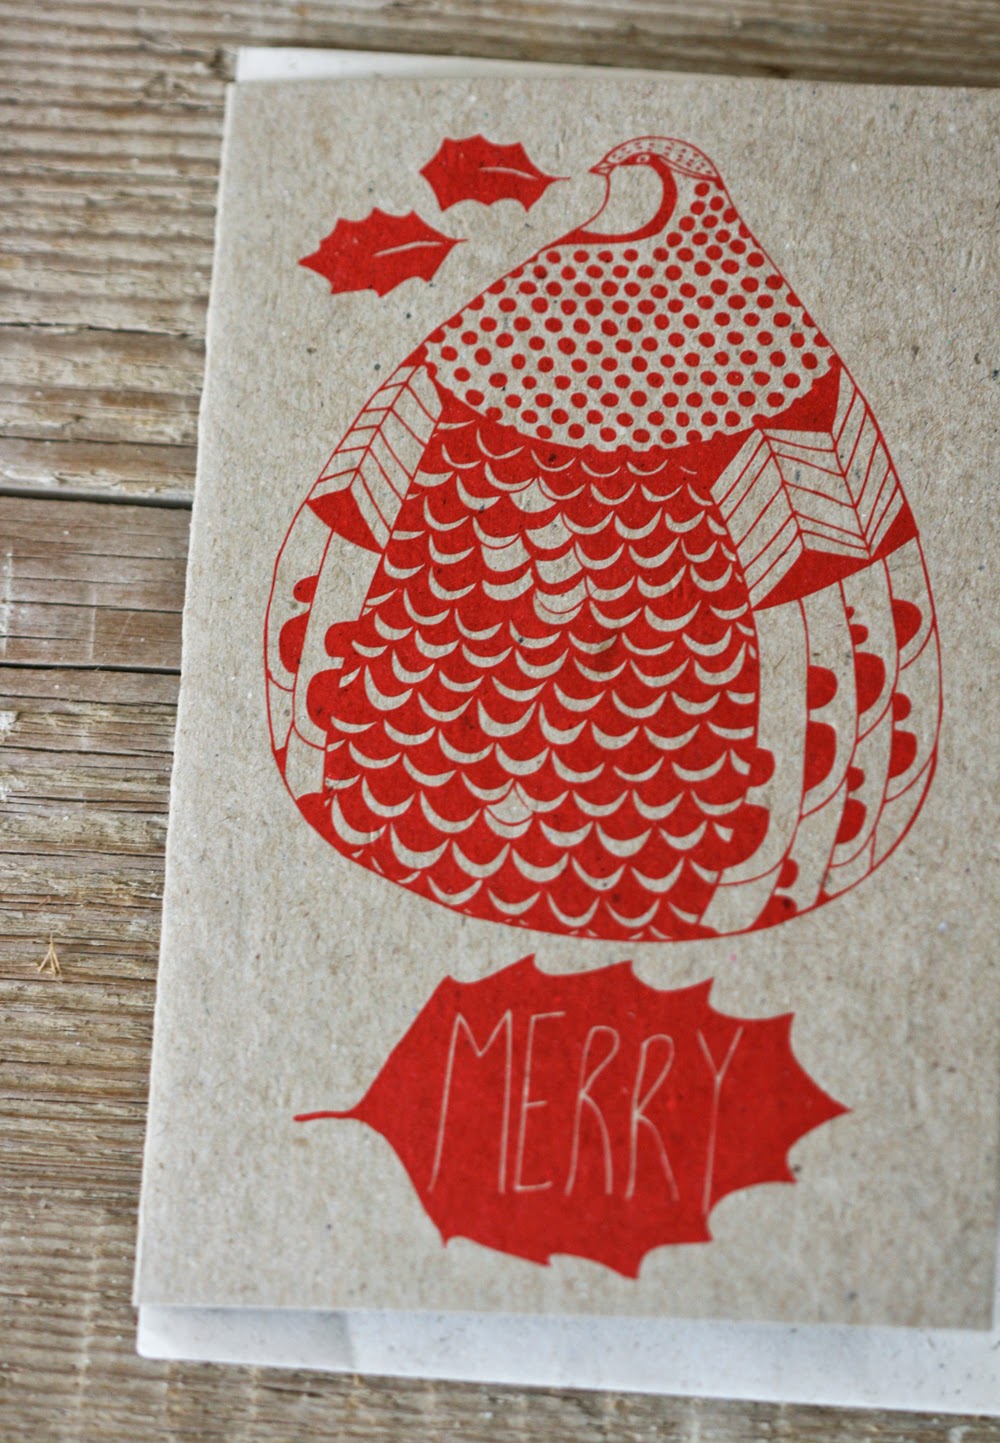 https://www.etsy.com/listing/207837829/merry-partridge-christmas-card?ref=shop_home_active_8